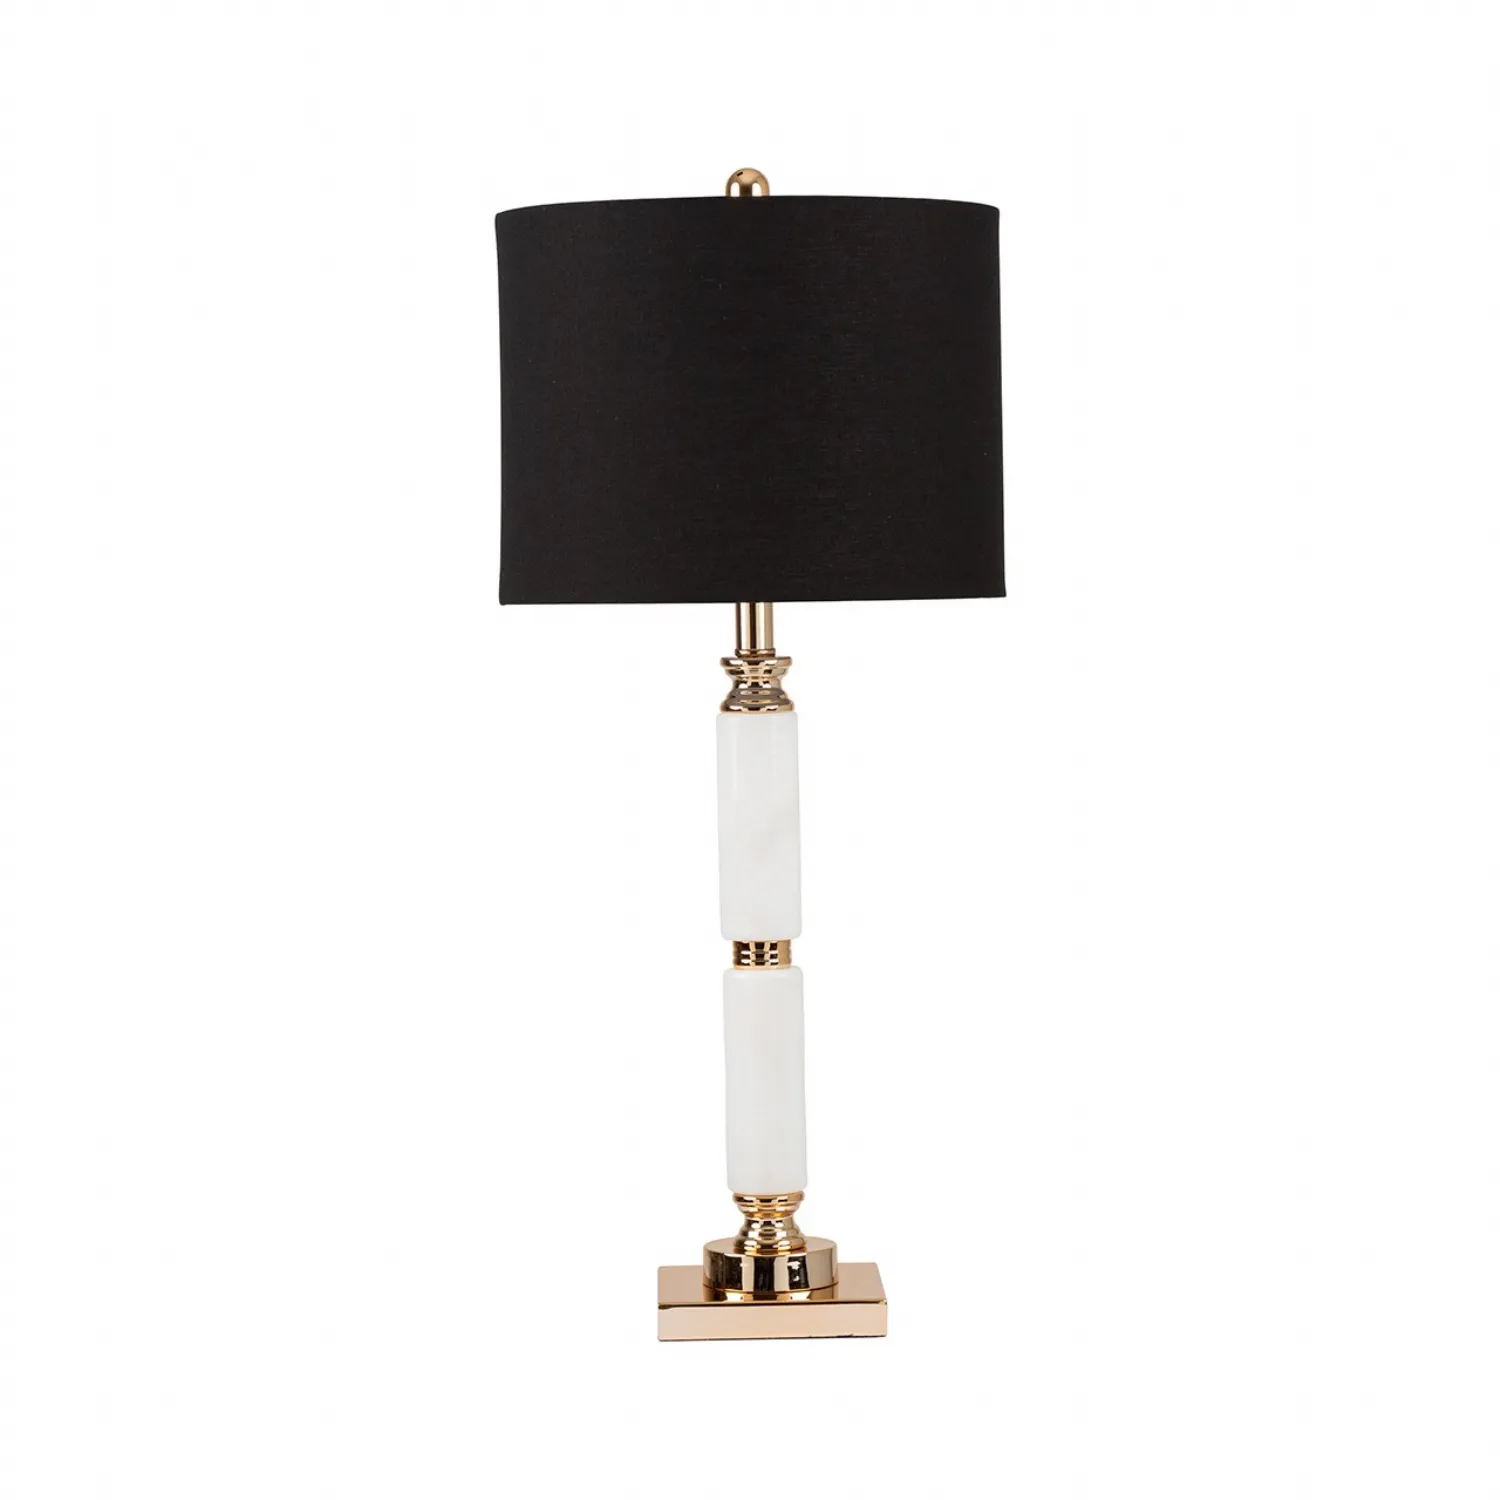 78cm White Marble Table Lamp With Black Shade